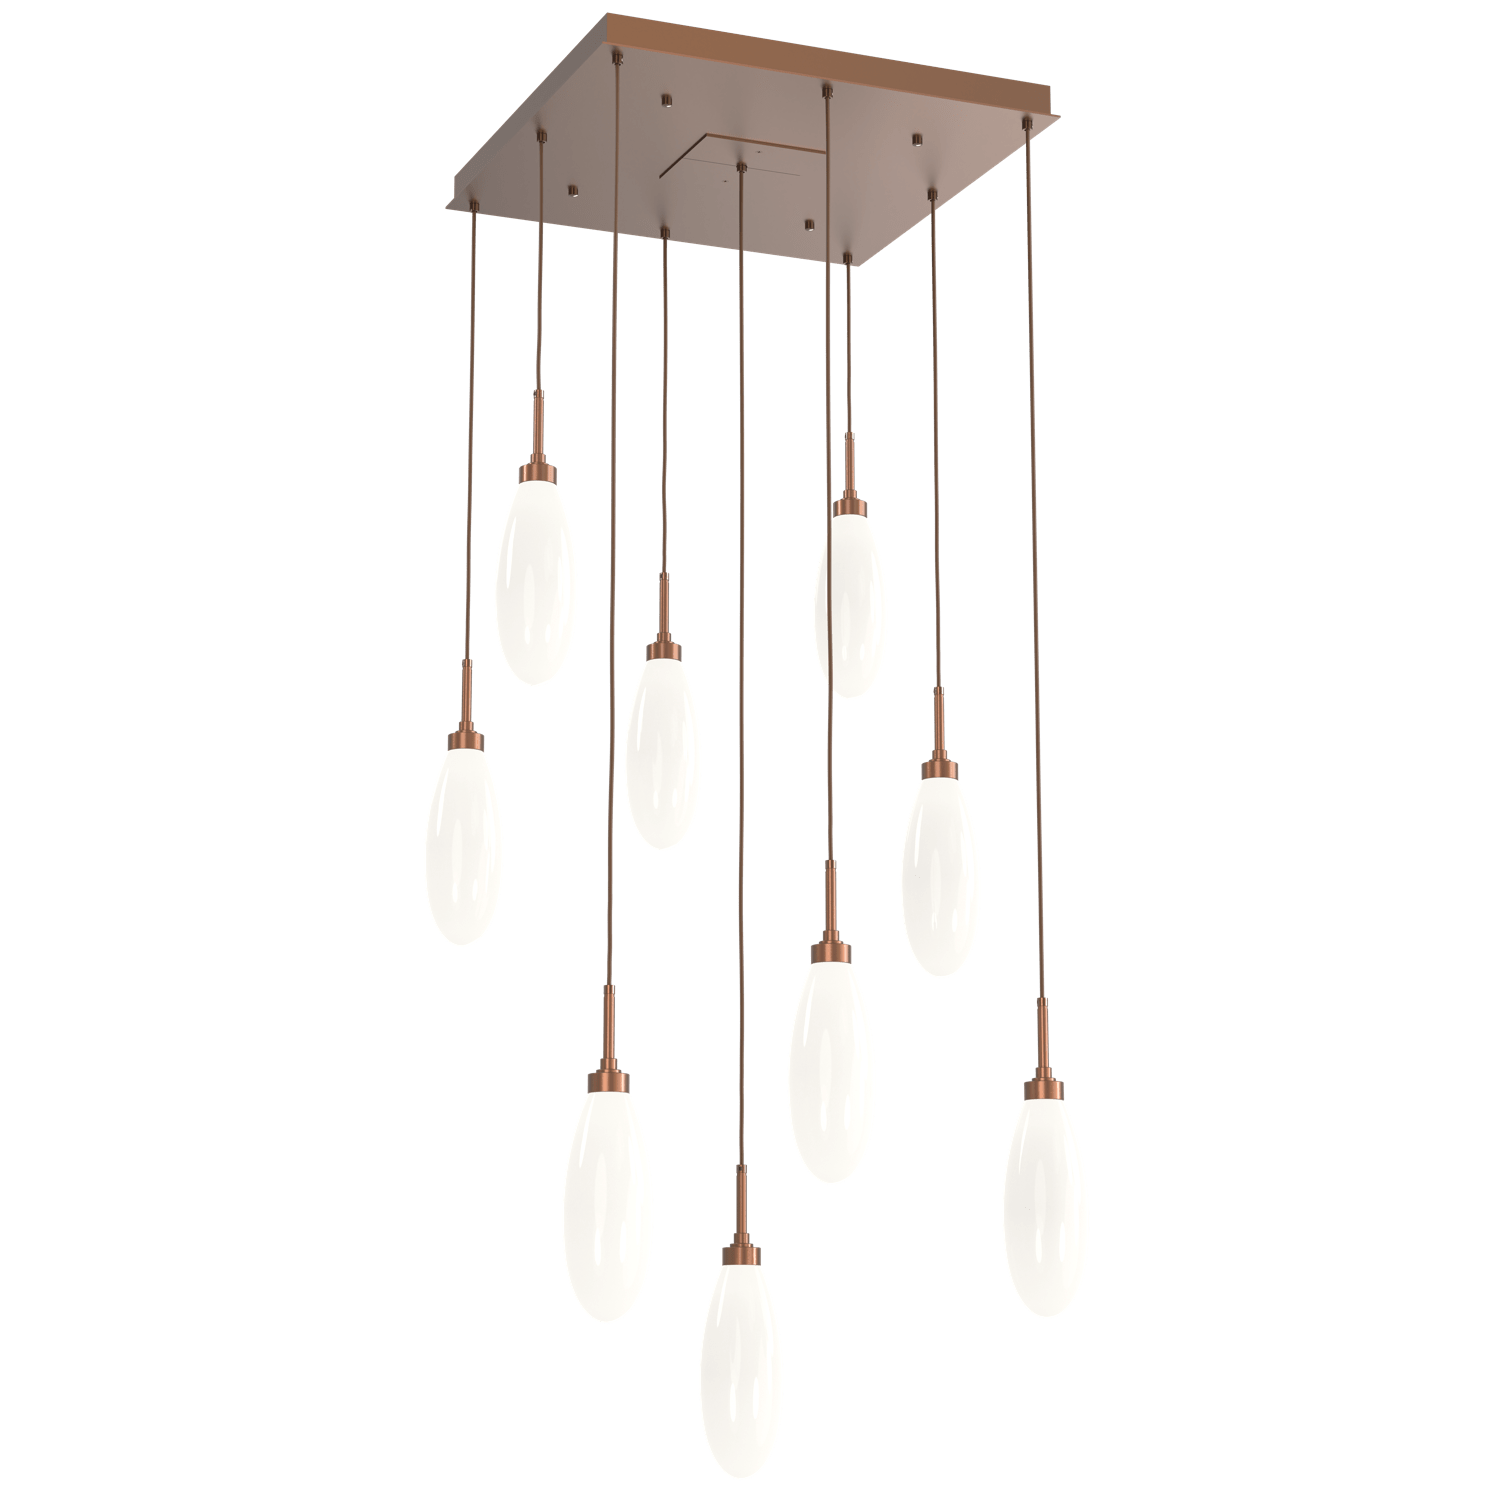 CHB0071-09-BB-WL-LL-Hammerton-Studio-Fiori-9-light-square-pendant-chandelier-with-burnished-bronze-finish-and-opal-white-glass-shades-and-LED-lamping